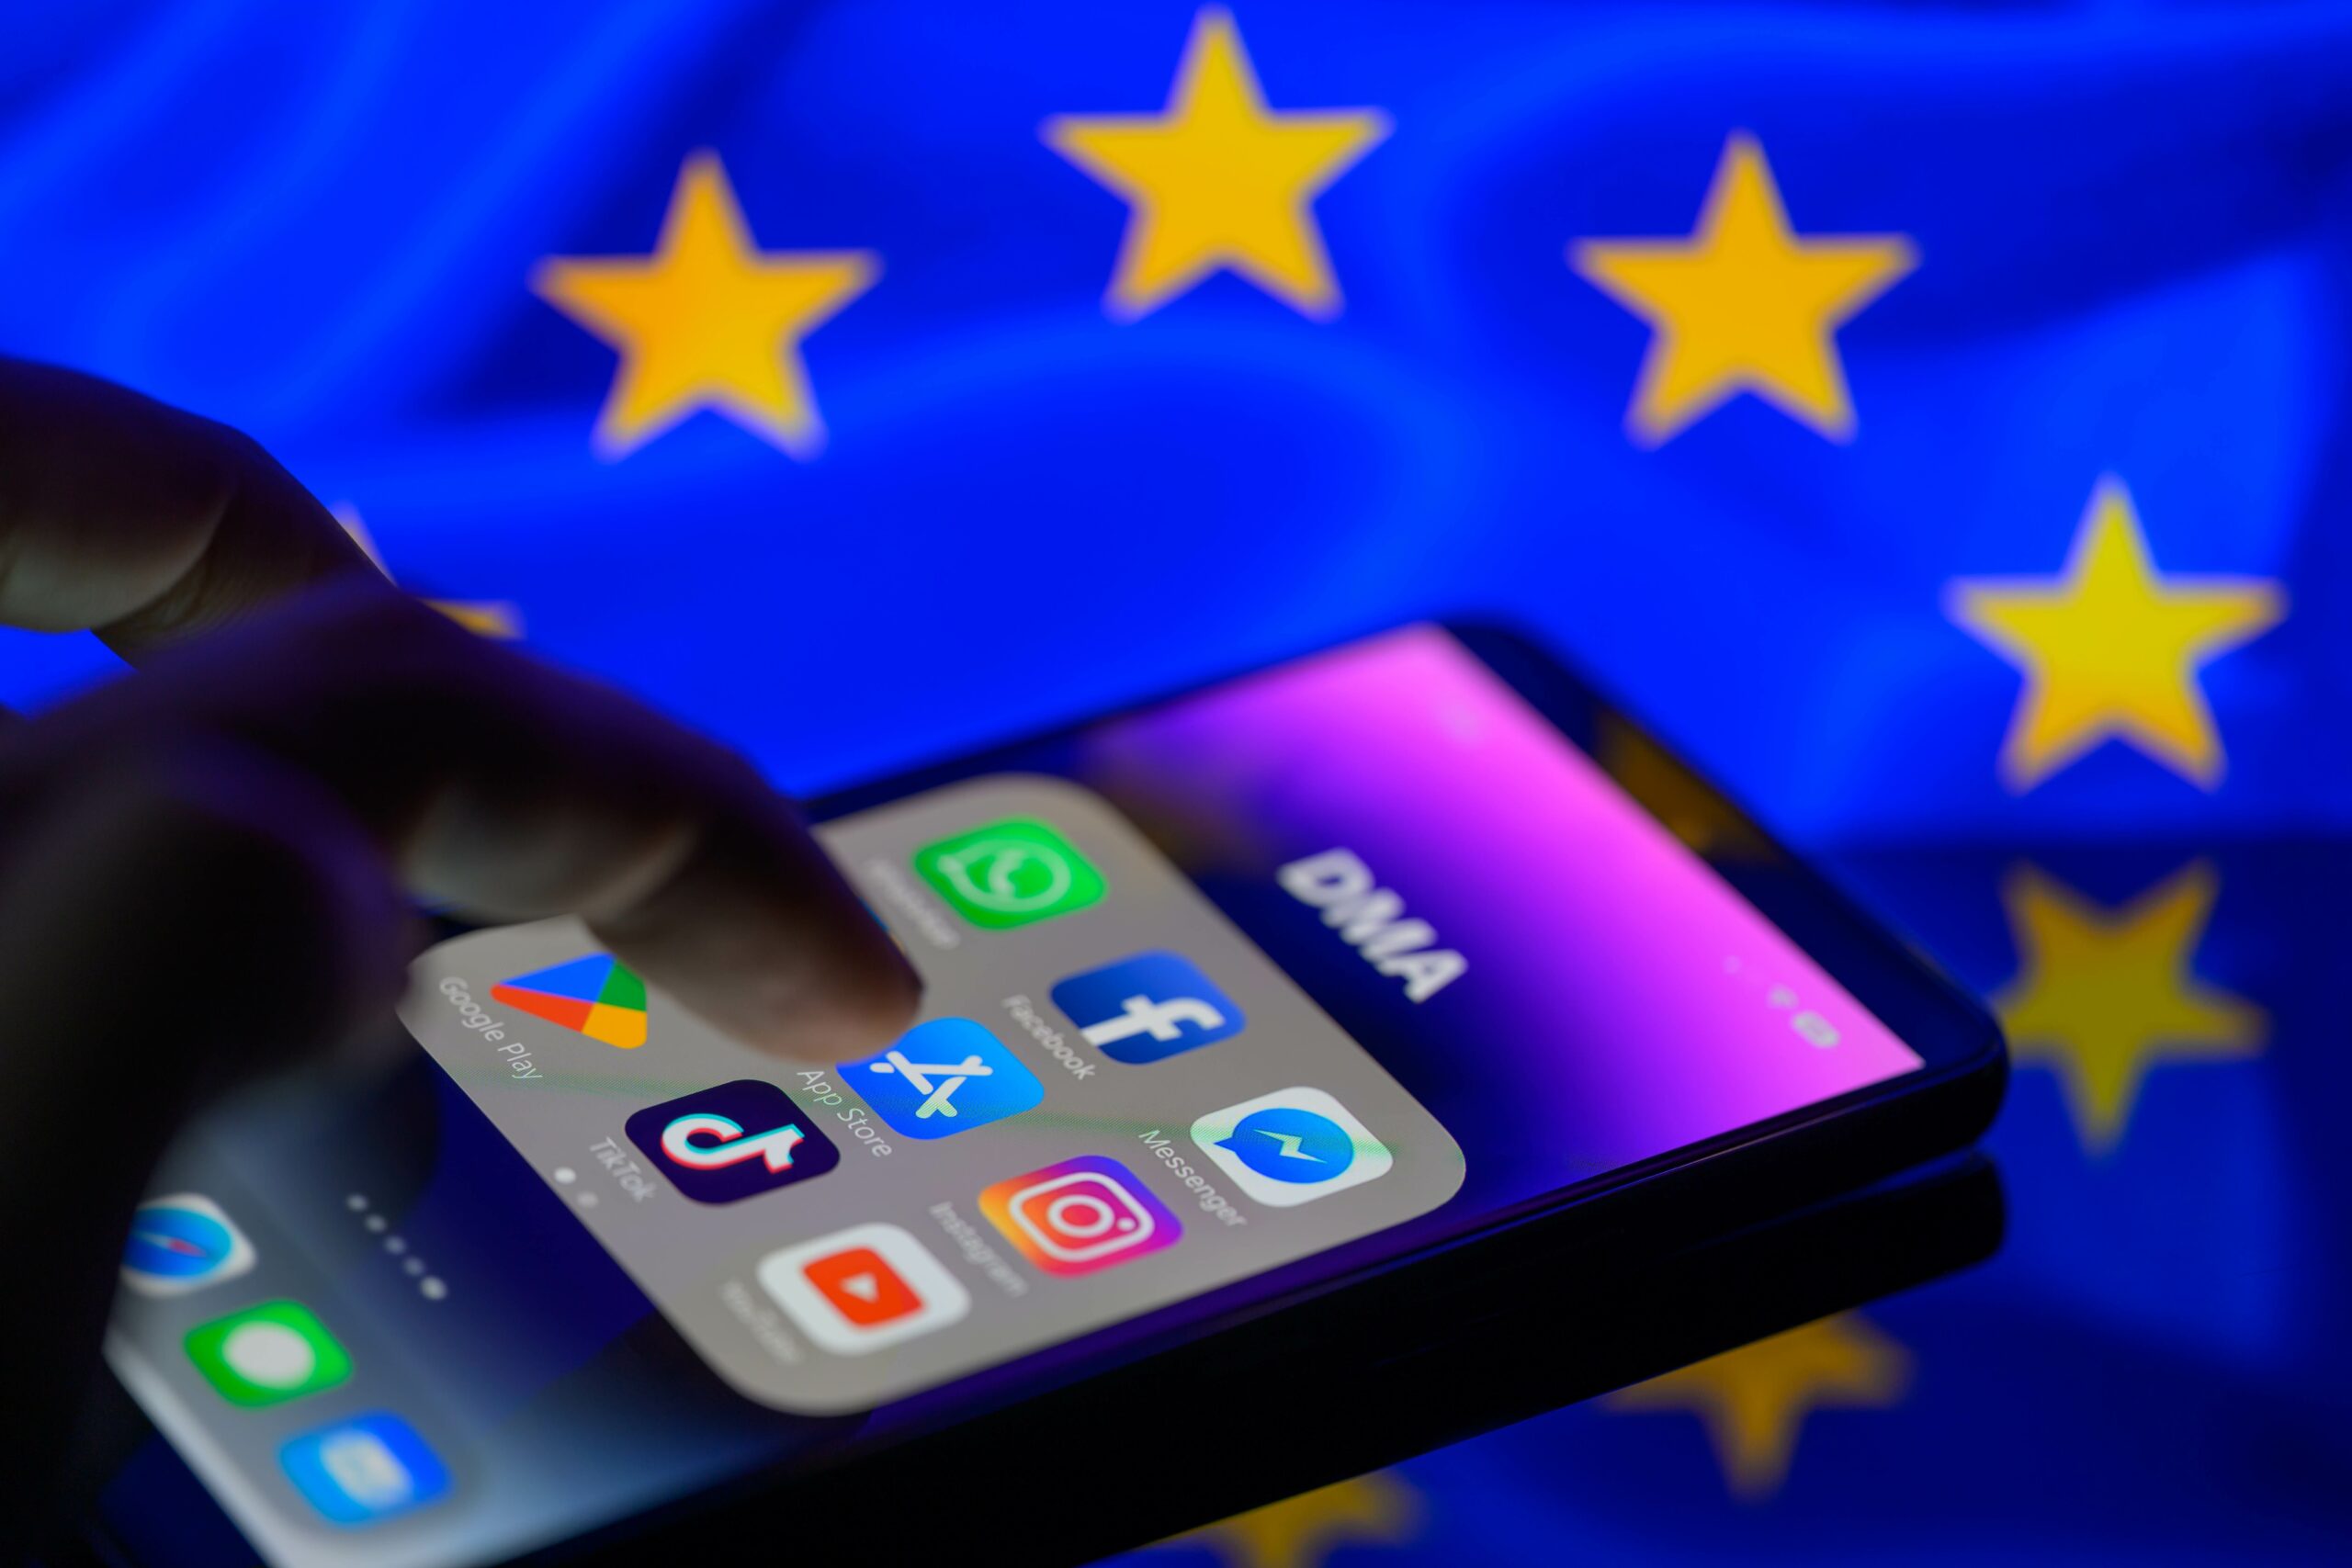 Apple iPhone with the EU flag in the background